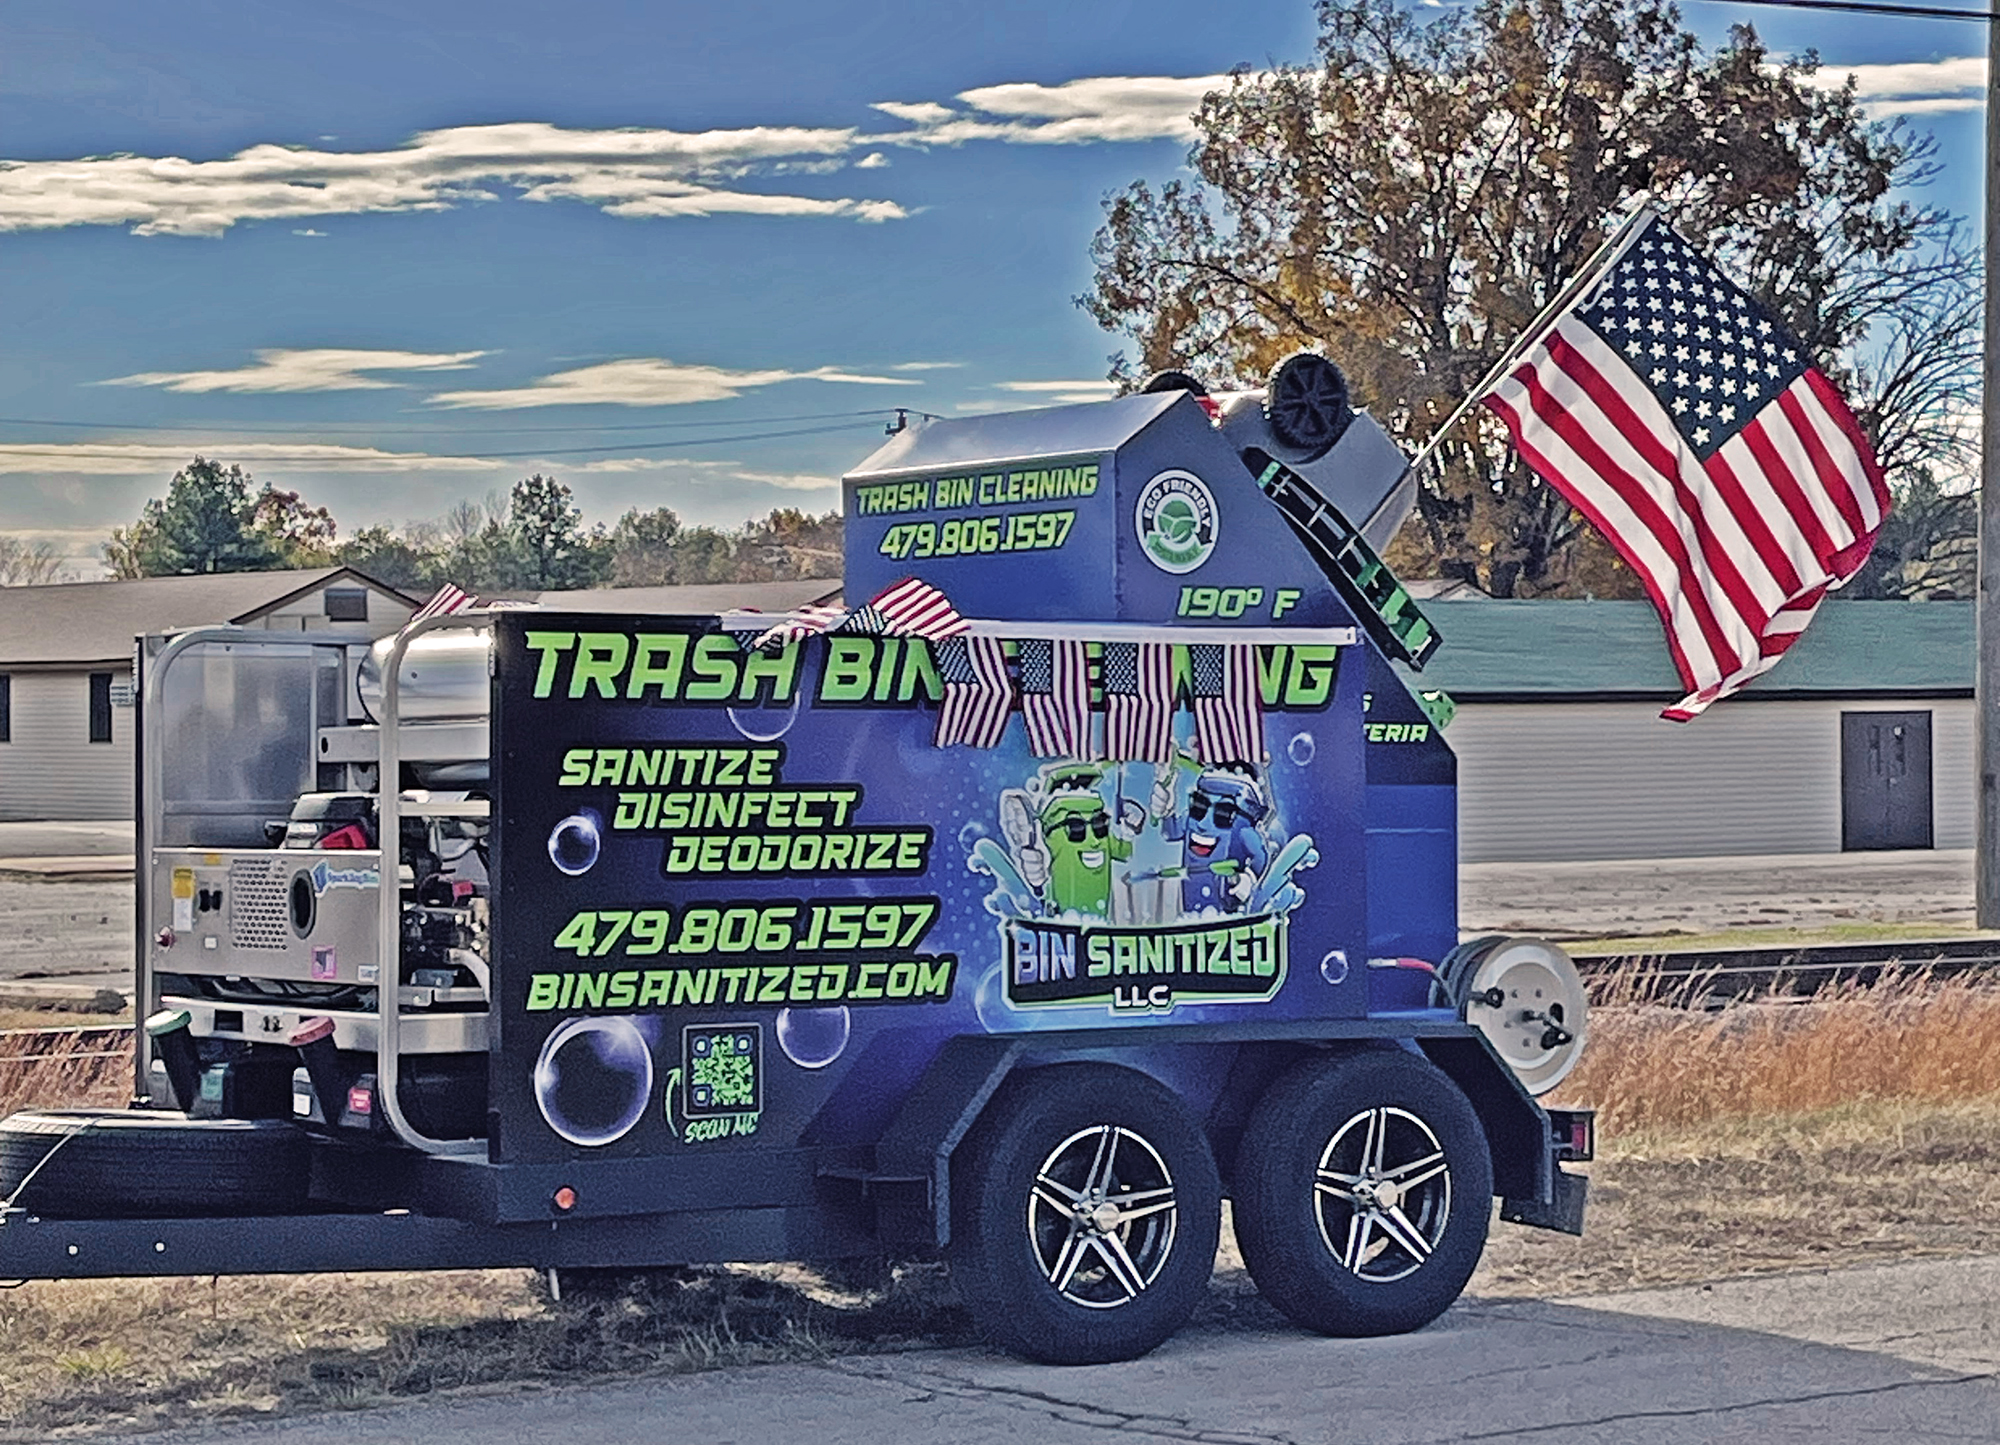 images/Oklahoma+Arkansas-Trash-Can-Cleaning-Services.jpg